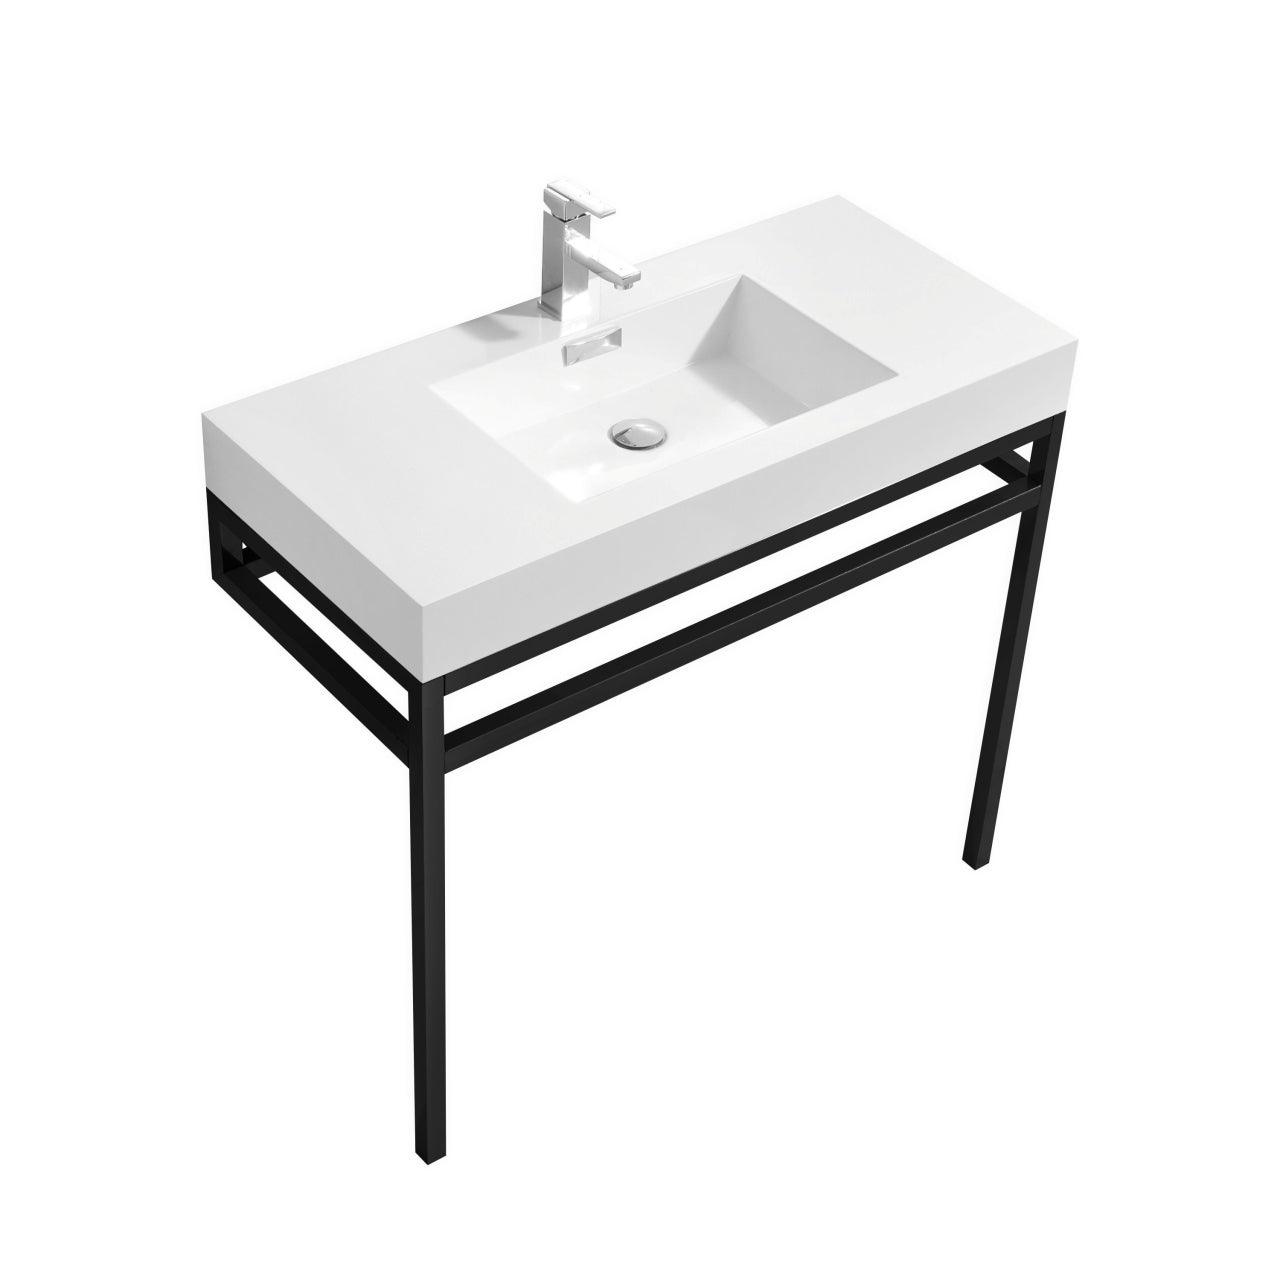 Haus 36" Stainless Steel Console w/ White Acrylic Sink - Home and Bath Depot